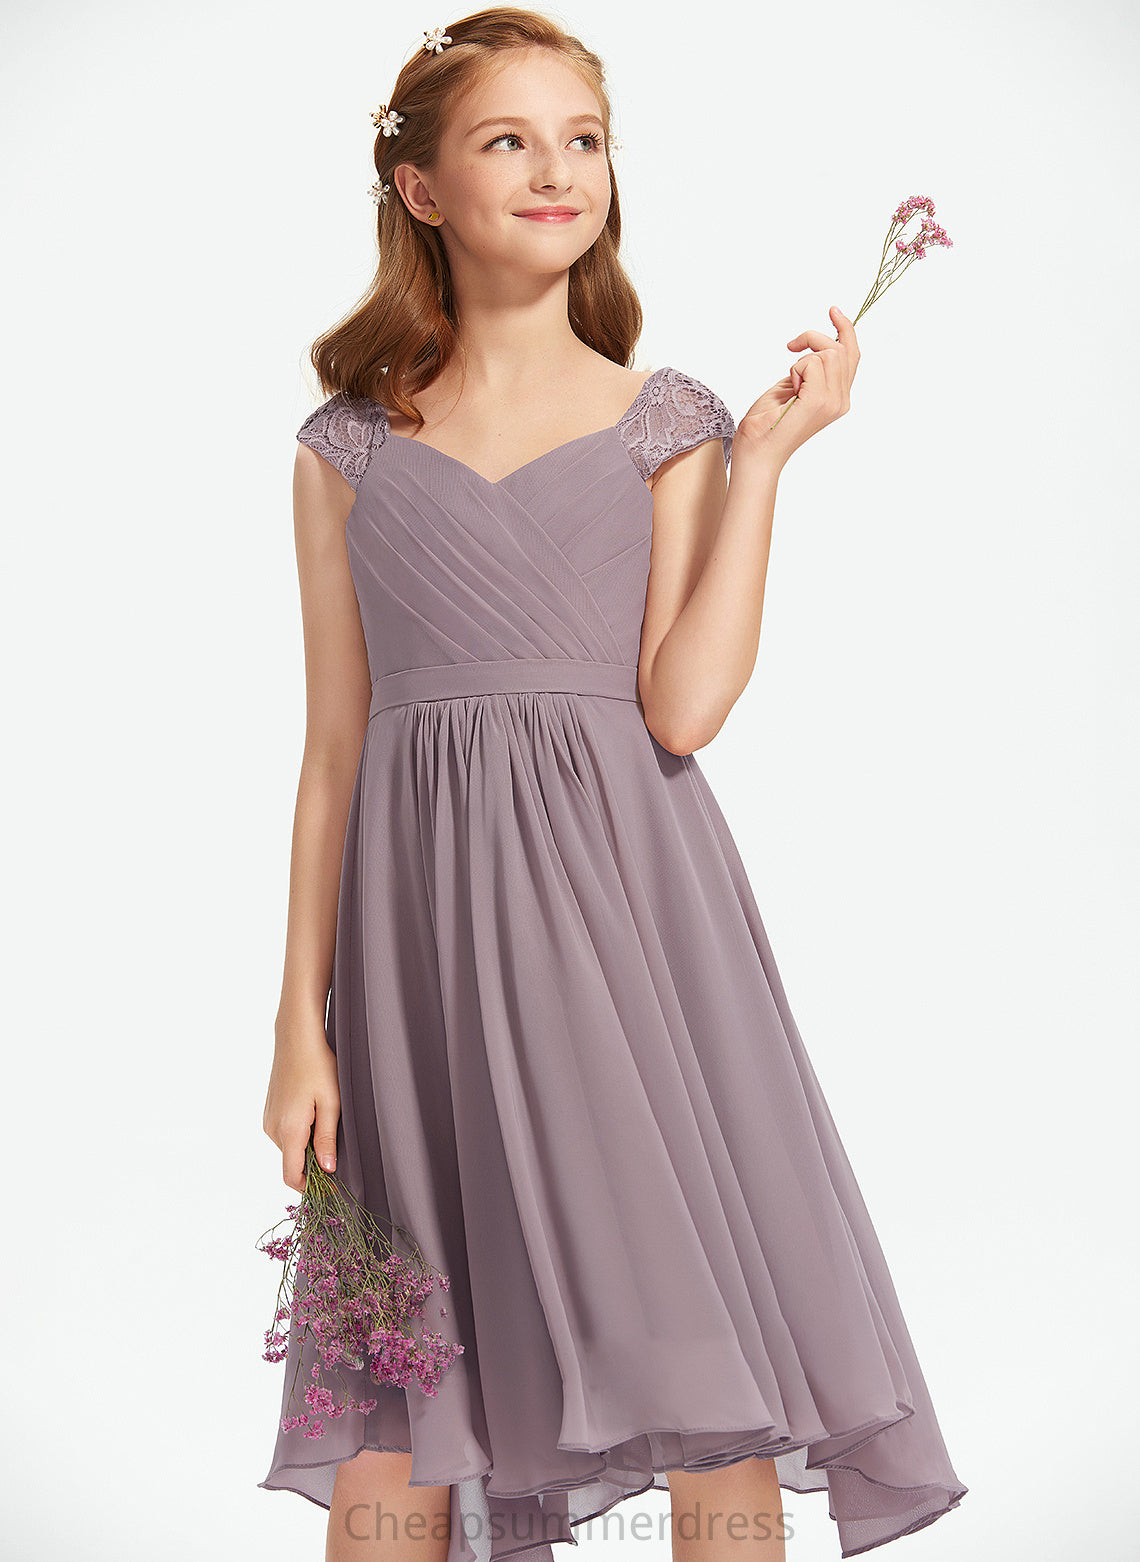 Junior Bridesmaid Dresses Knee-Length A-Line Lace V-neck Campbell Ruffle With Chiffon